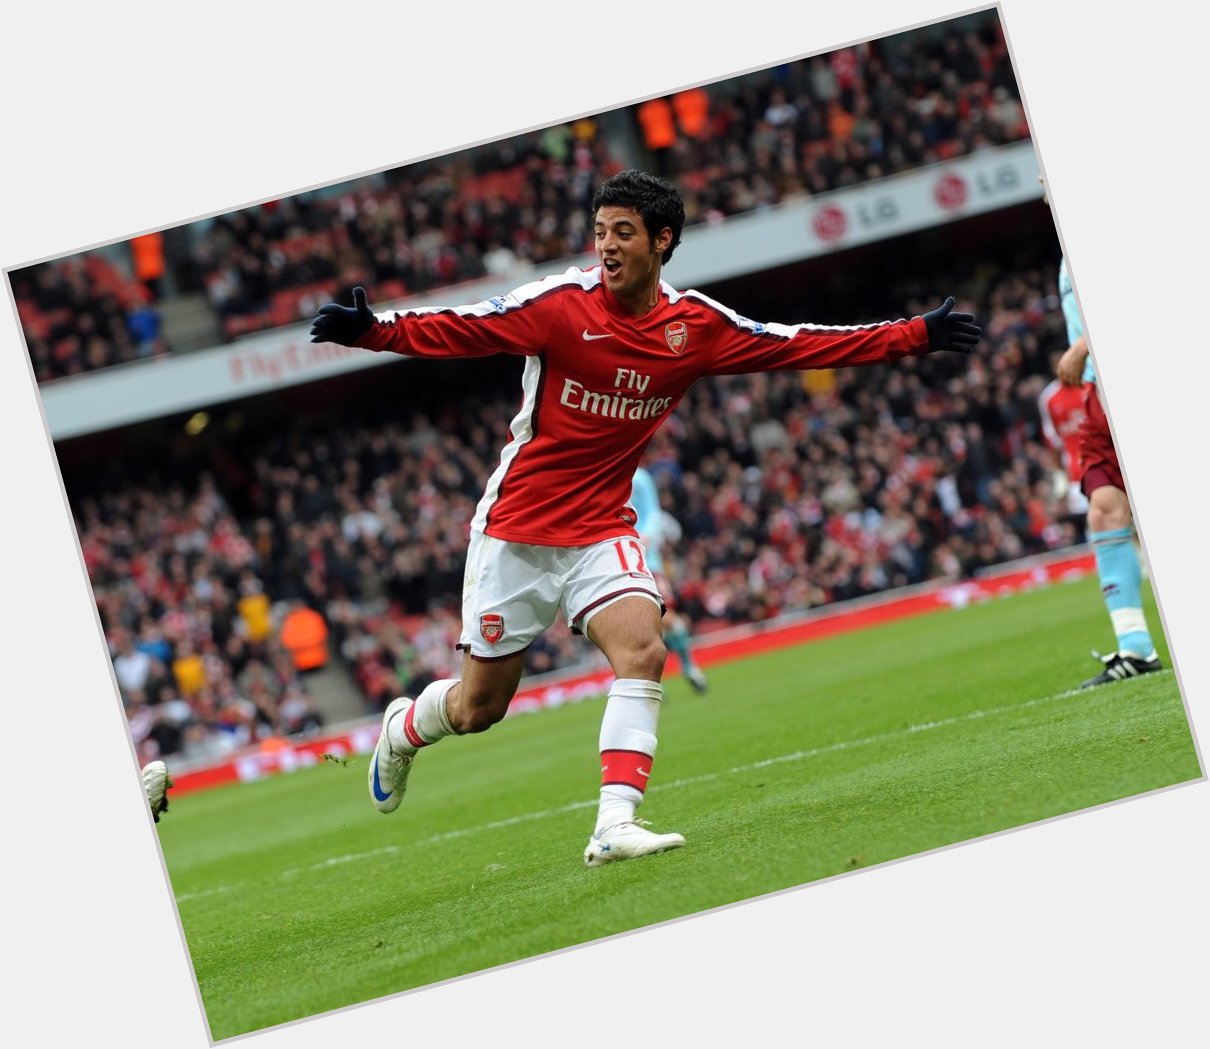 Happy birthday to our former Mexican Gunner, Carlos Vela! 